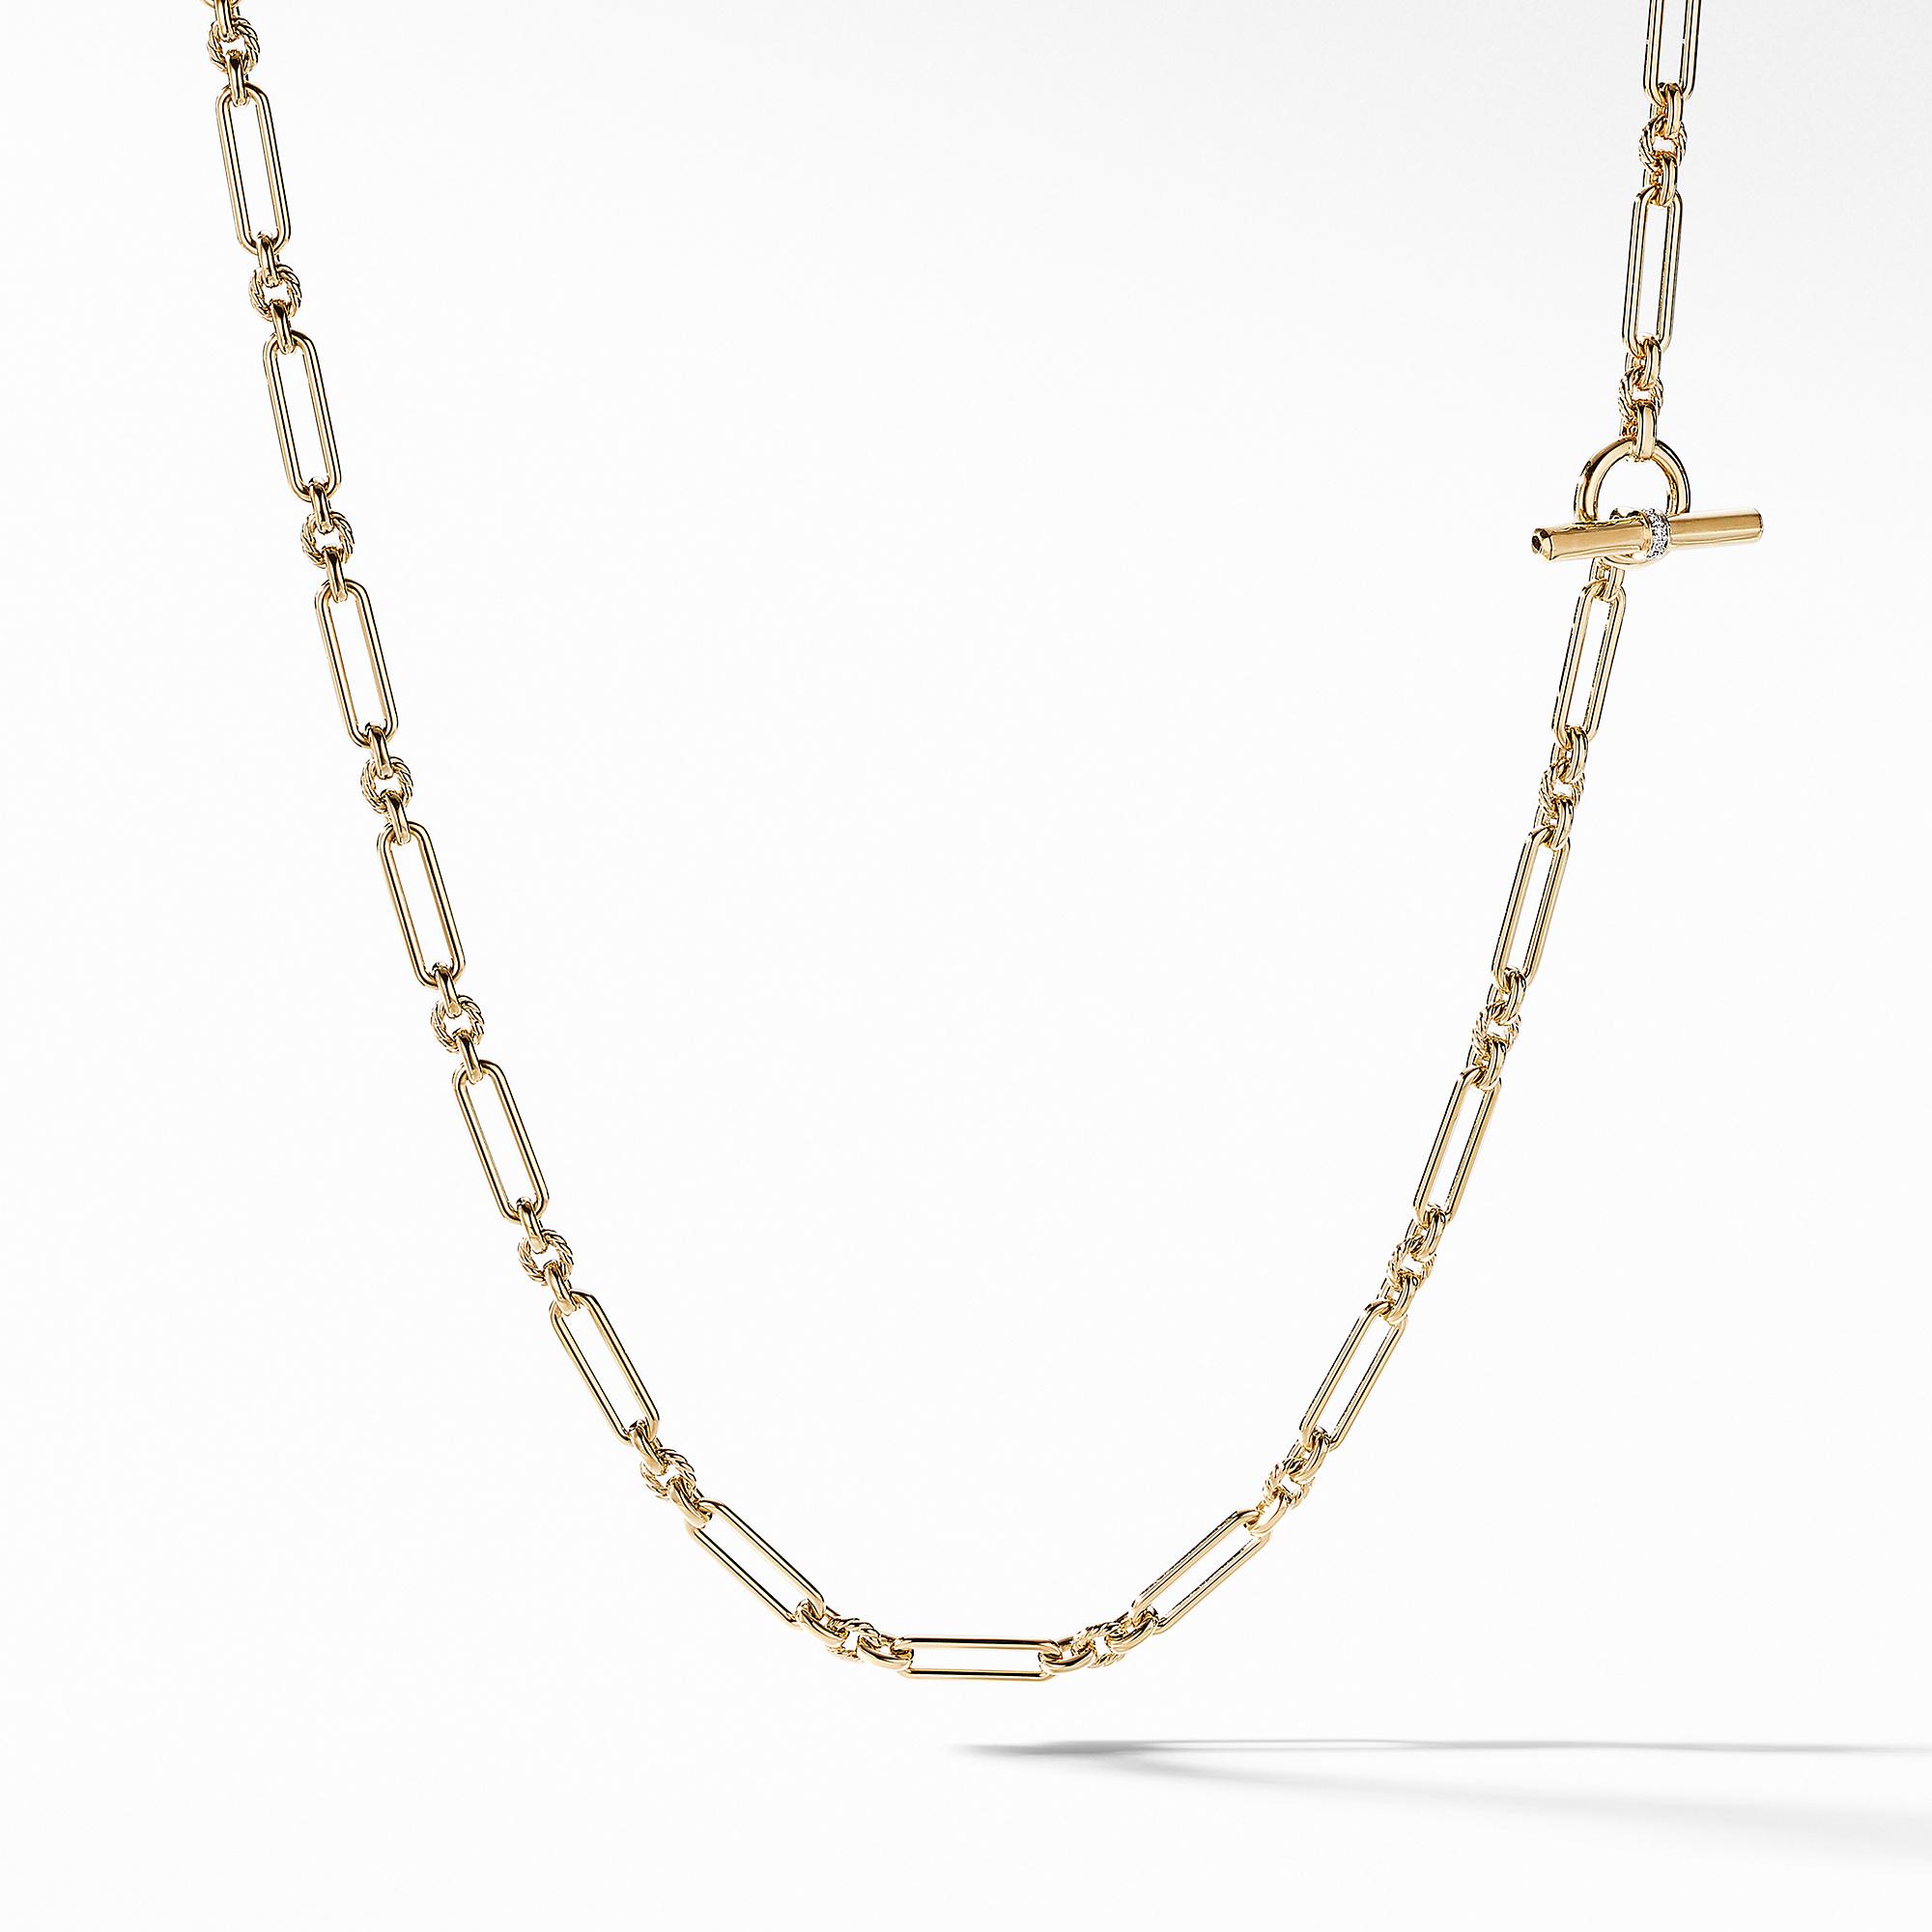 David Yurman Lexington Toggle Clasp Chain Necklace in 18K Yellow Gold with Diamonds, 36 inches